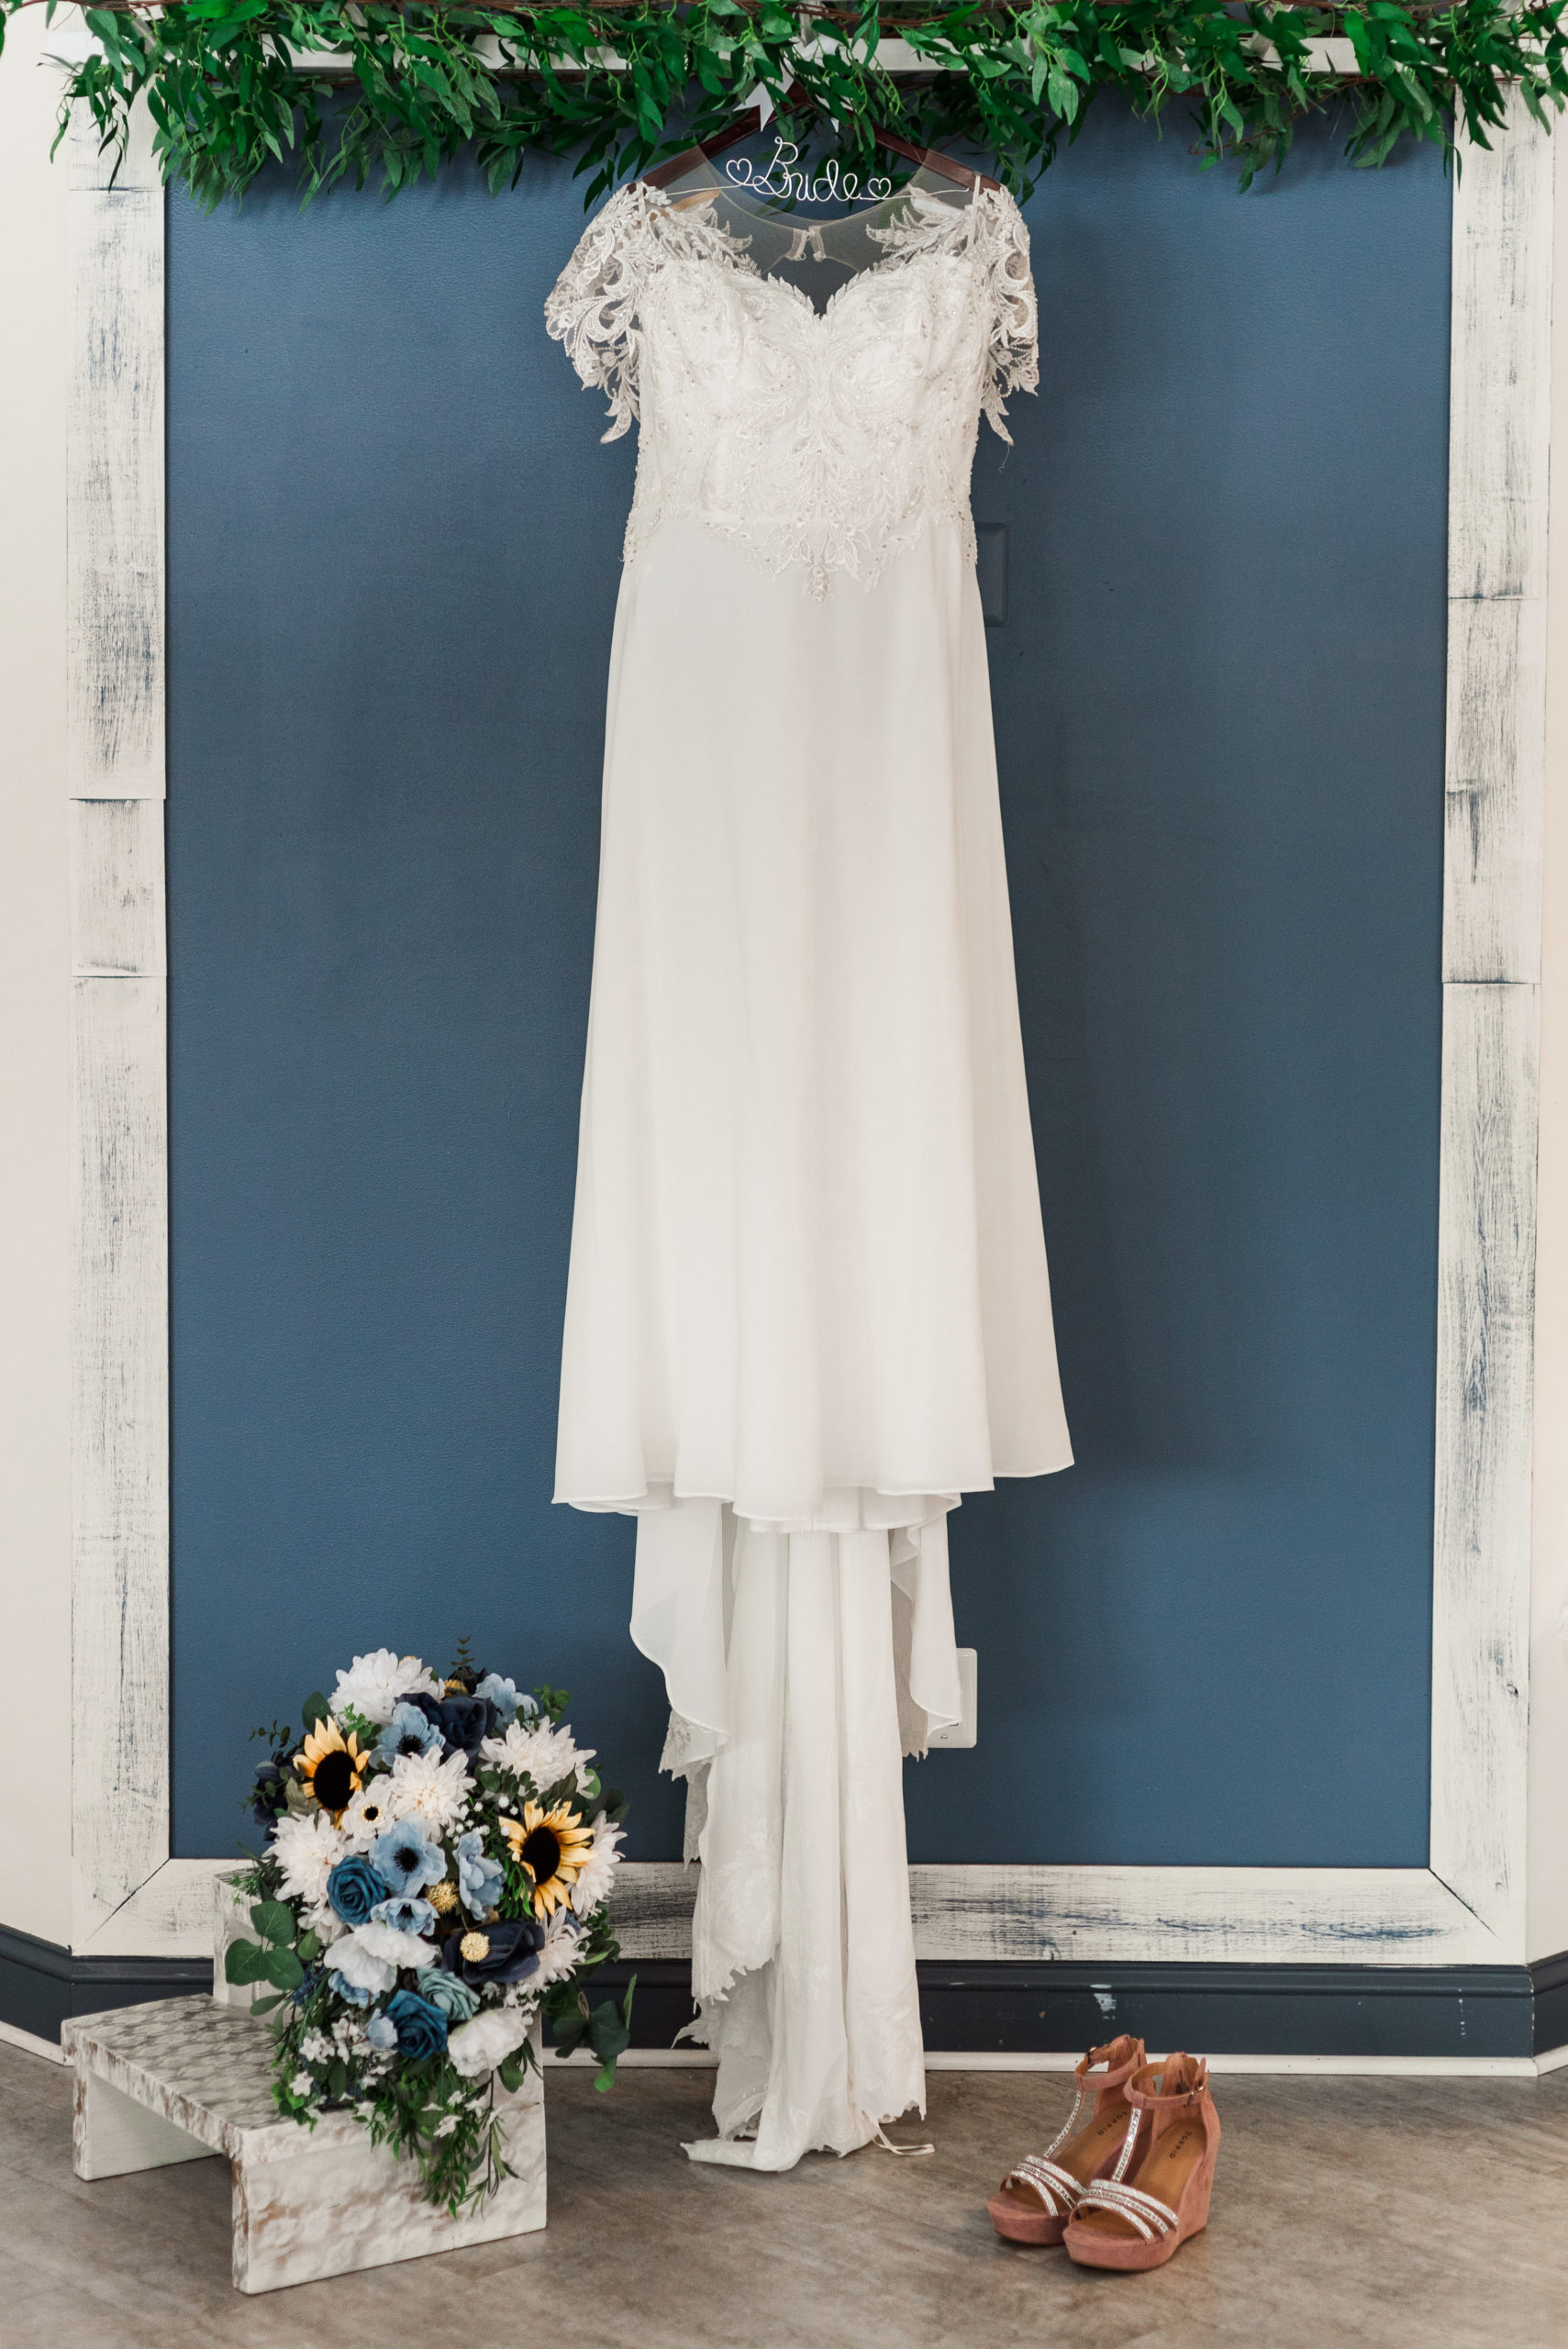 wedding gown with bouquet and shoes